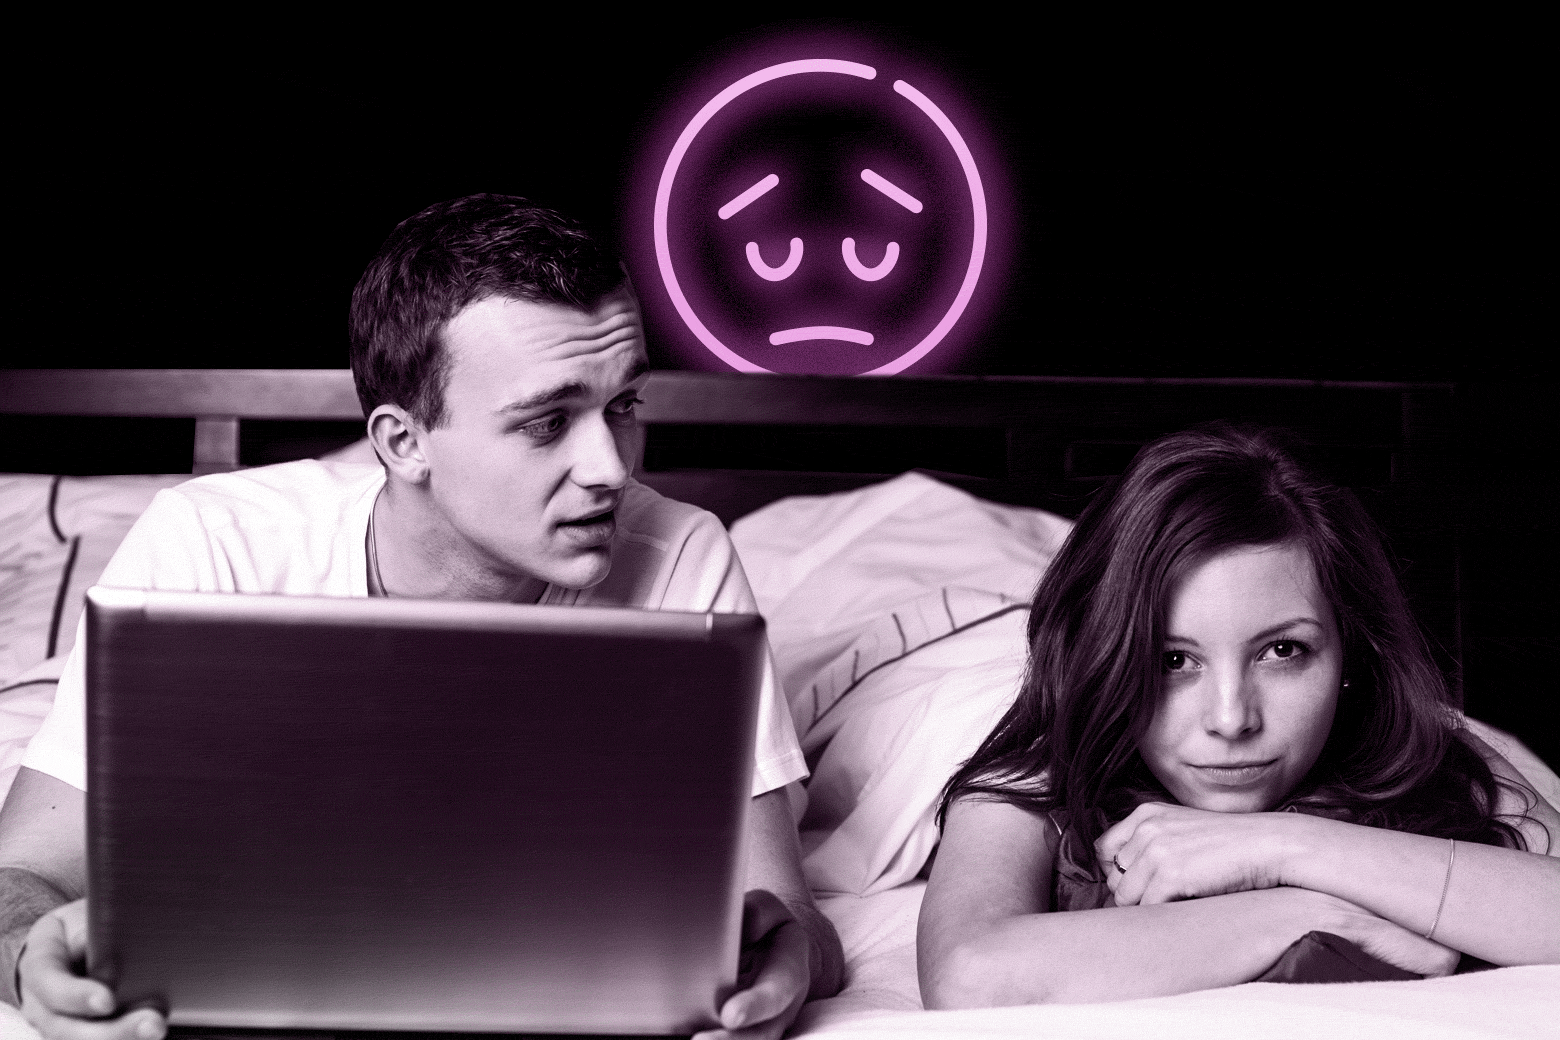 A man reads from a laptop in bed with a woman beside him looking miserable. A sad face emoji in neon hovers over them.